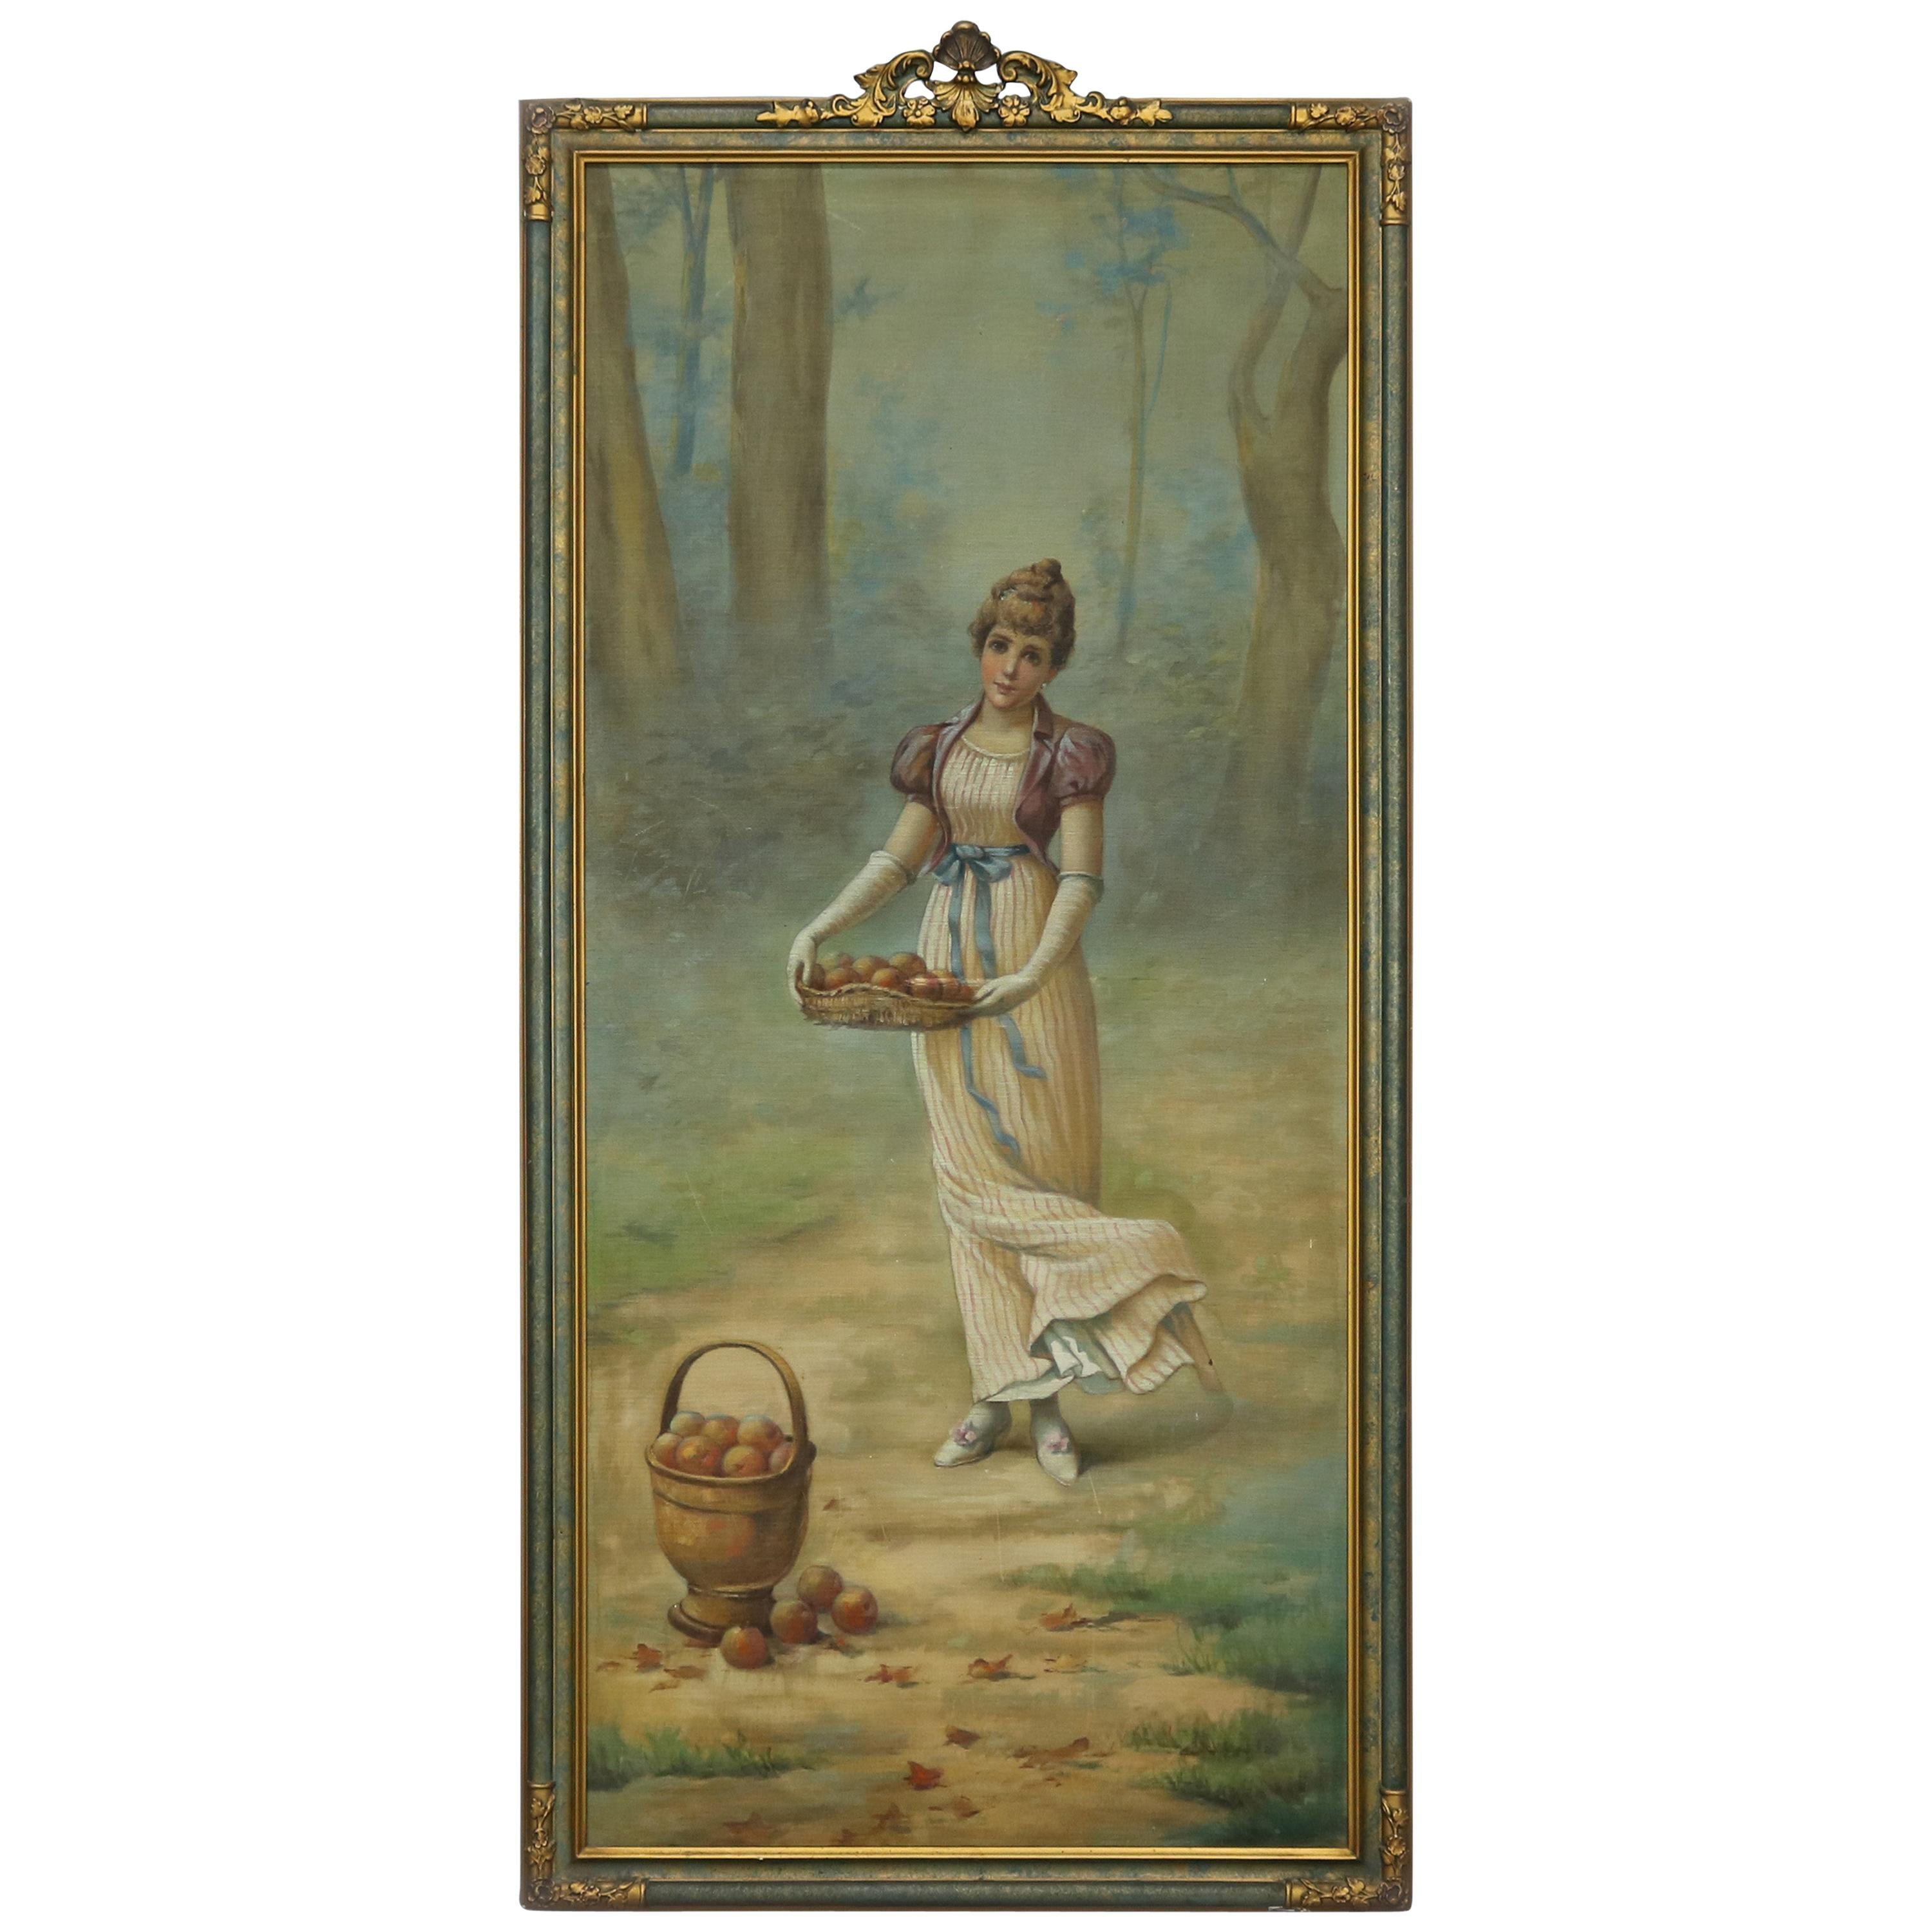 Antique Oversized Framed Tapestry Painting of Young Woman & Fruit, c 1900